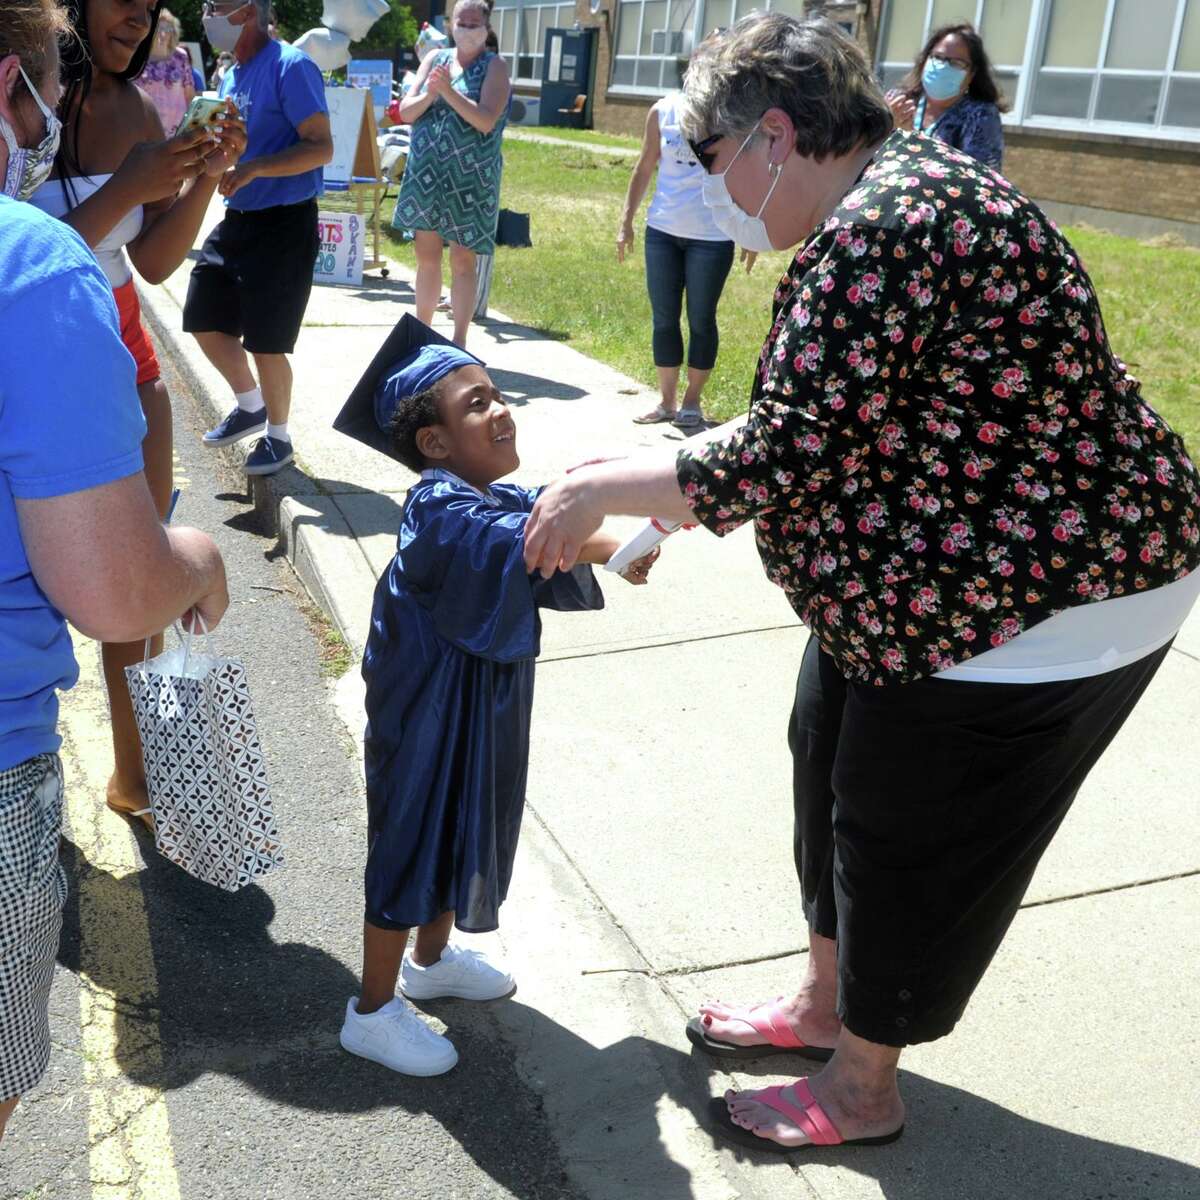 Jordon Thompson is greeted by teacher Sally Pace as his arrives to pick up his diploma at Skane School, in Bridgeport, Conn. June 8, 2020. The school held a drive-through graduation event for Pre-k students on Monday.